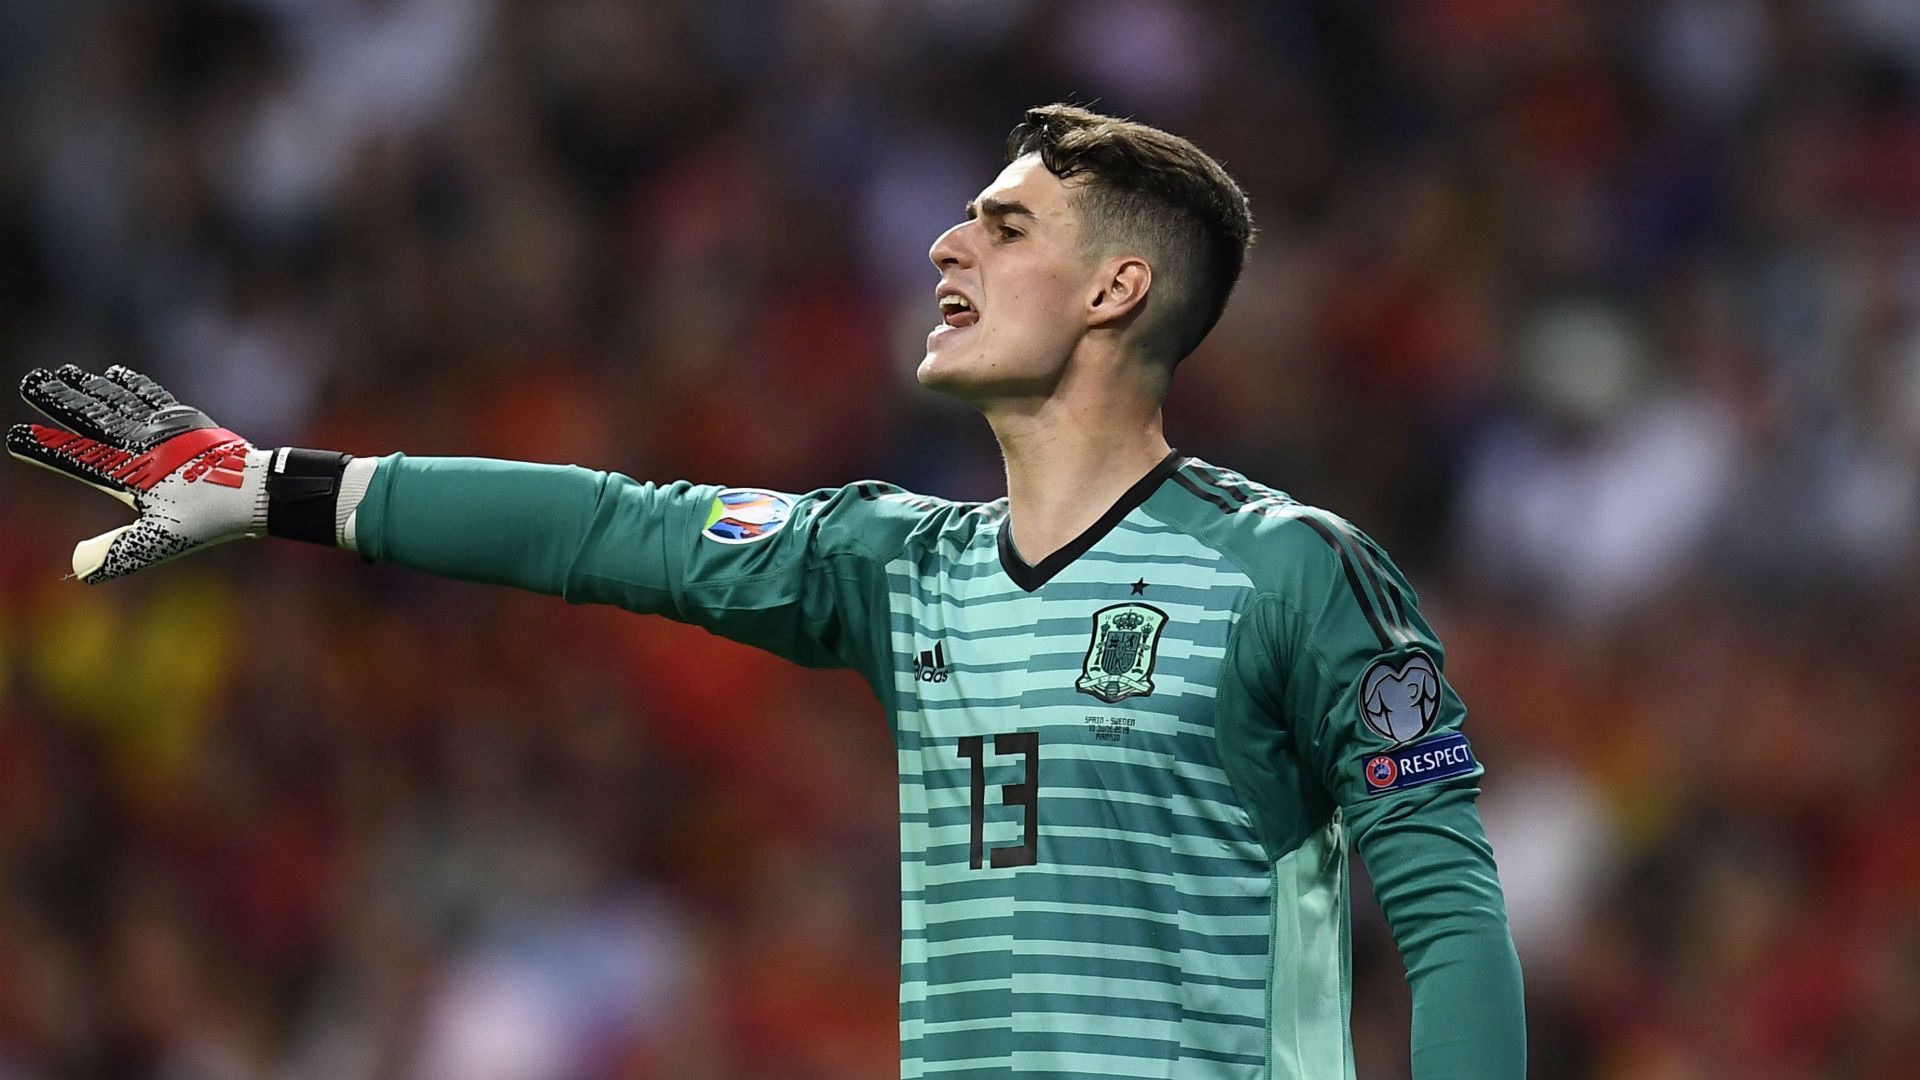 Kepa Is Not Spain's First Choice Goalkeeper, Says Moreno